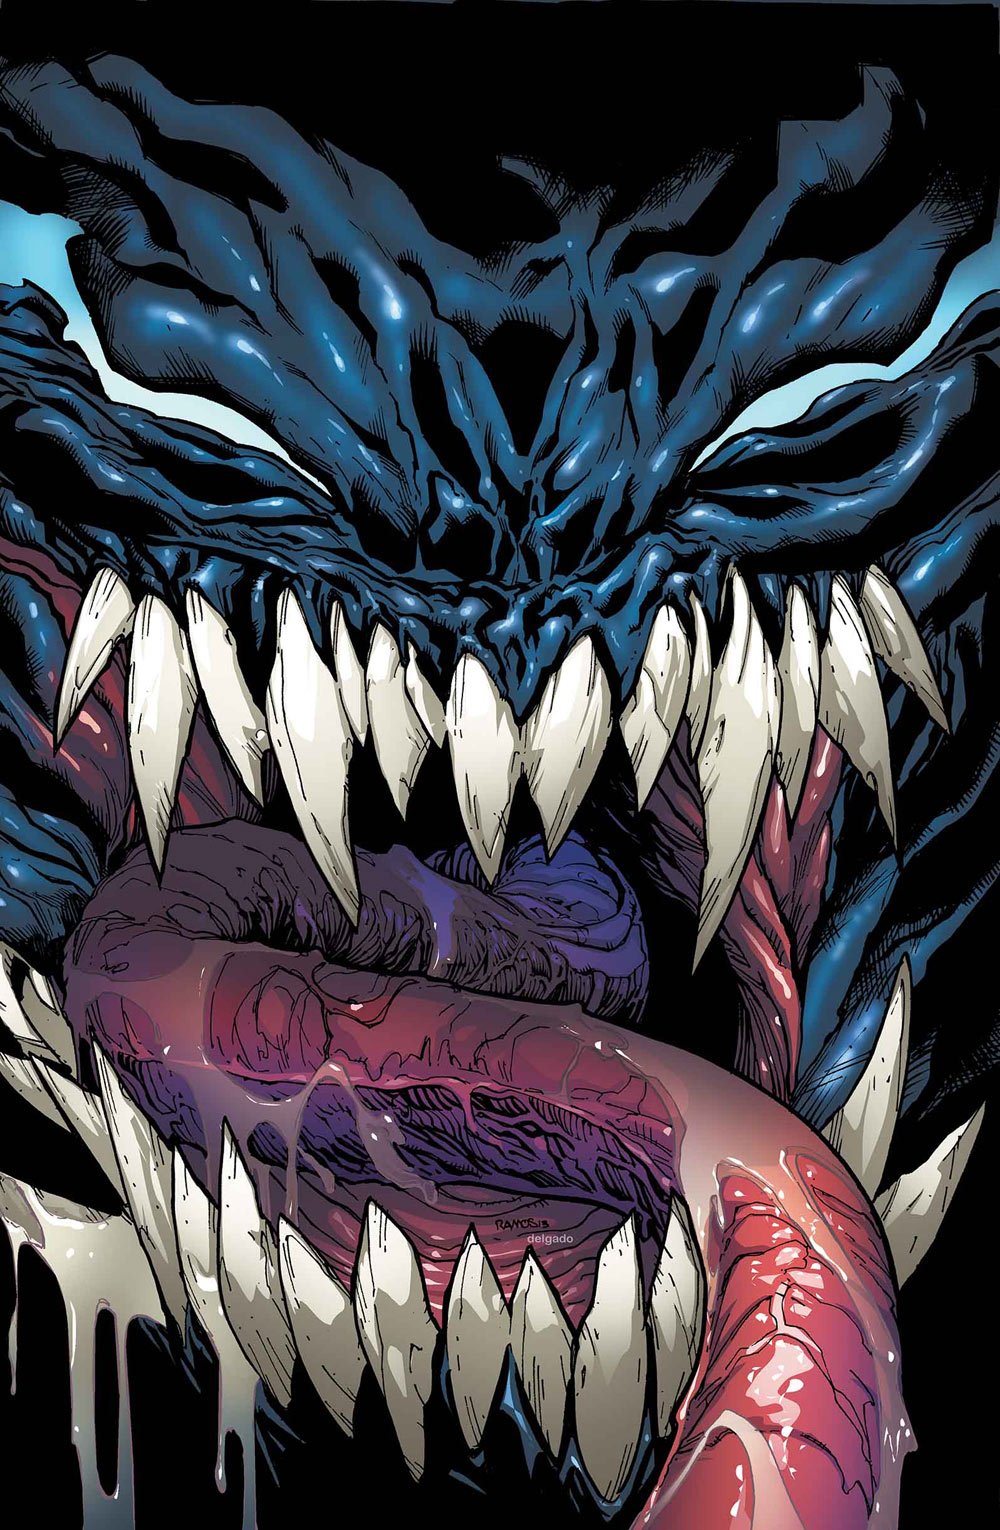 Yes, that's Venom. No, it's not who you think it is.